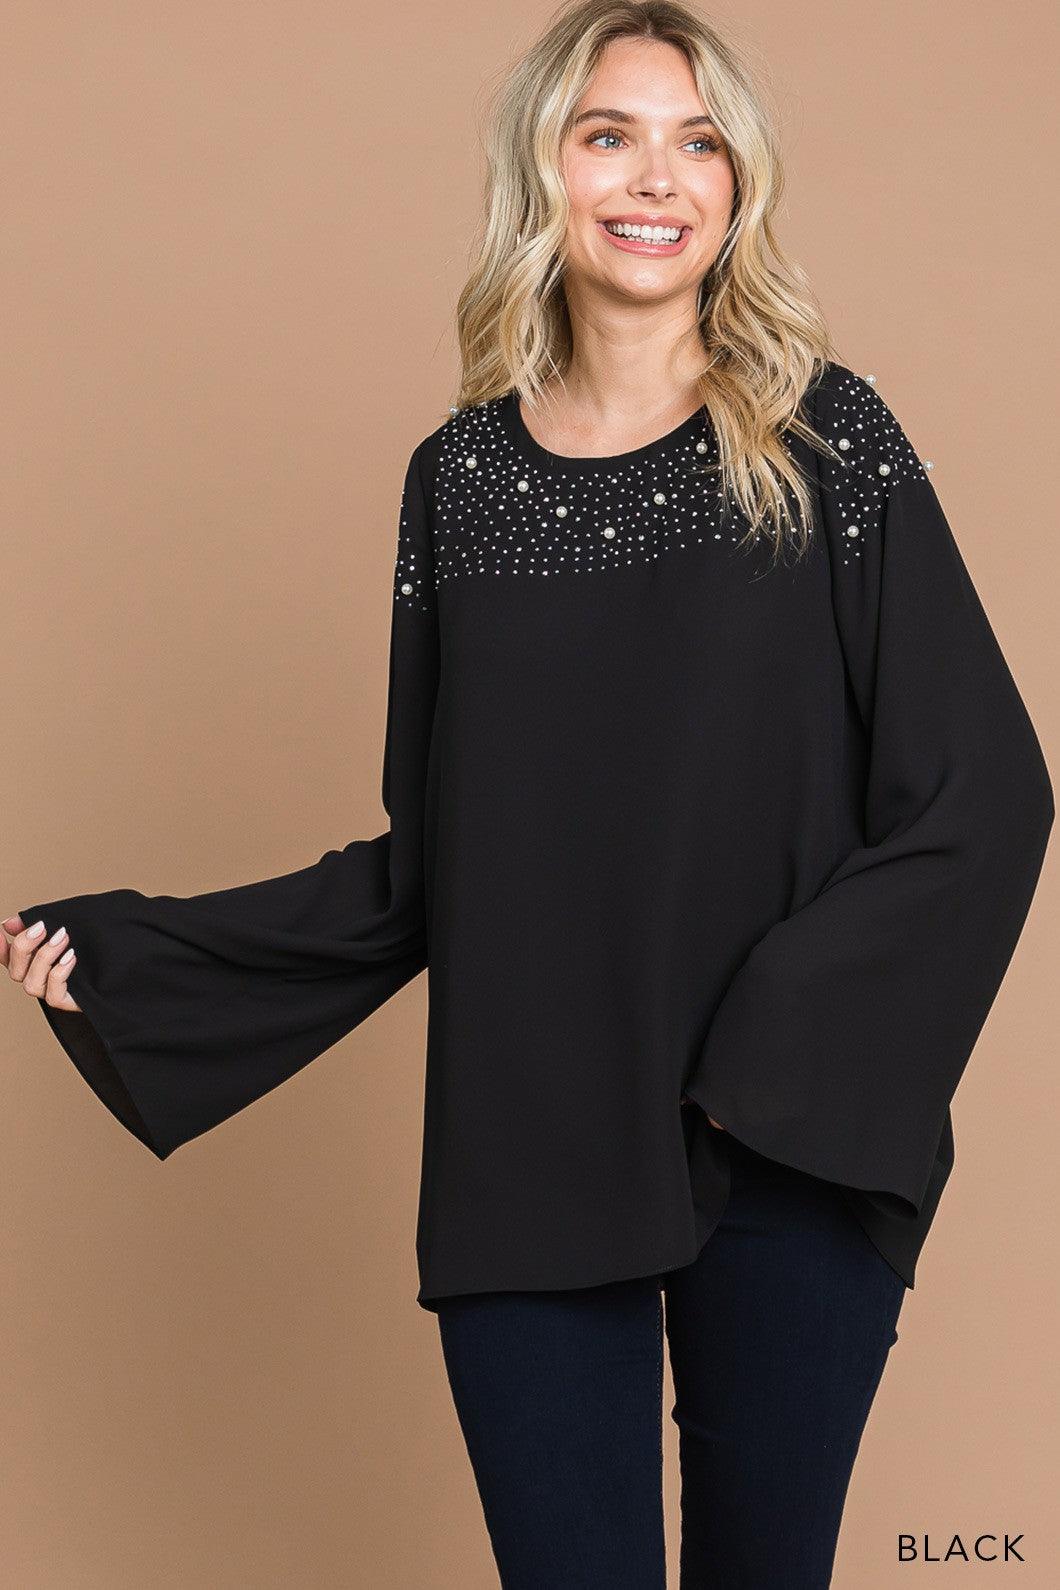 PLUS chiffon rhinestone/pearl bell sleeve top - RK Collections Boutique